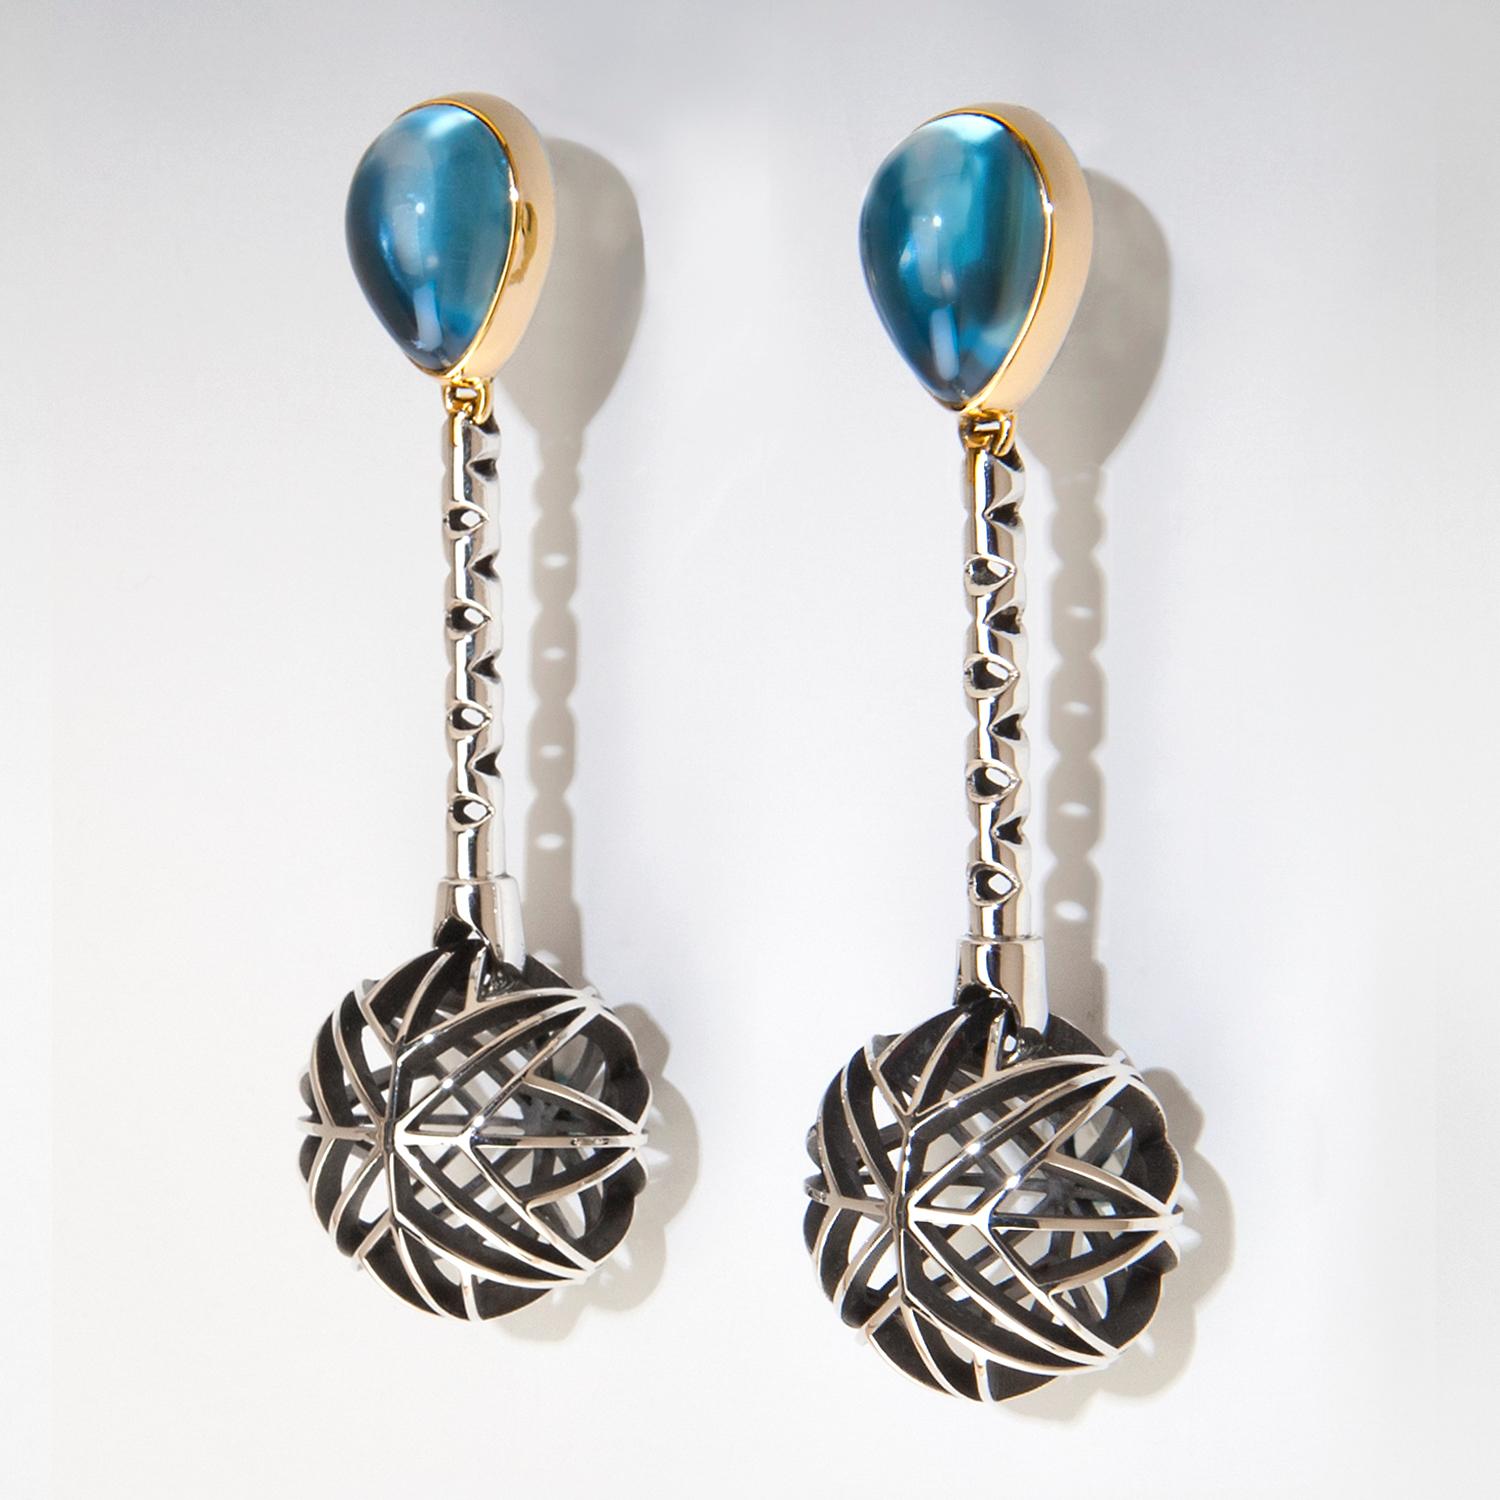 One of a Kind Earrings titled 'Shadows from a Blue Moon' are a variation of theme on Valerie Jo Coulson's Saul Bell Design Award winning Collection - 'Sunshine and Shadow'.  Custom cut Electric Blue Topaz cabochons are bezel set in 14k Yellow Gold